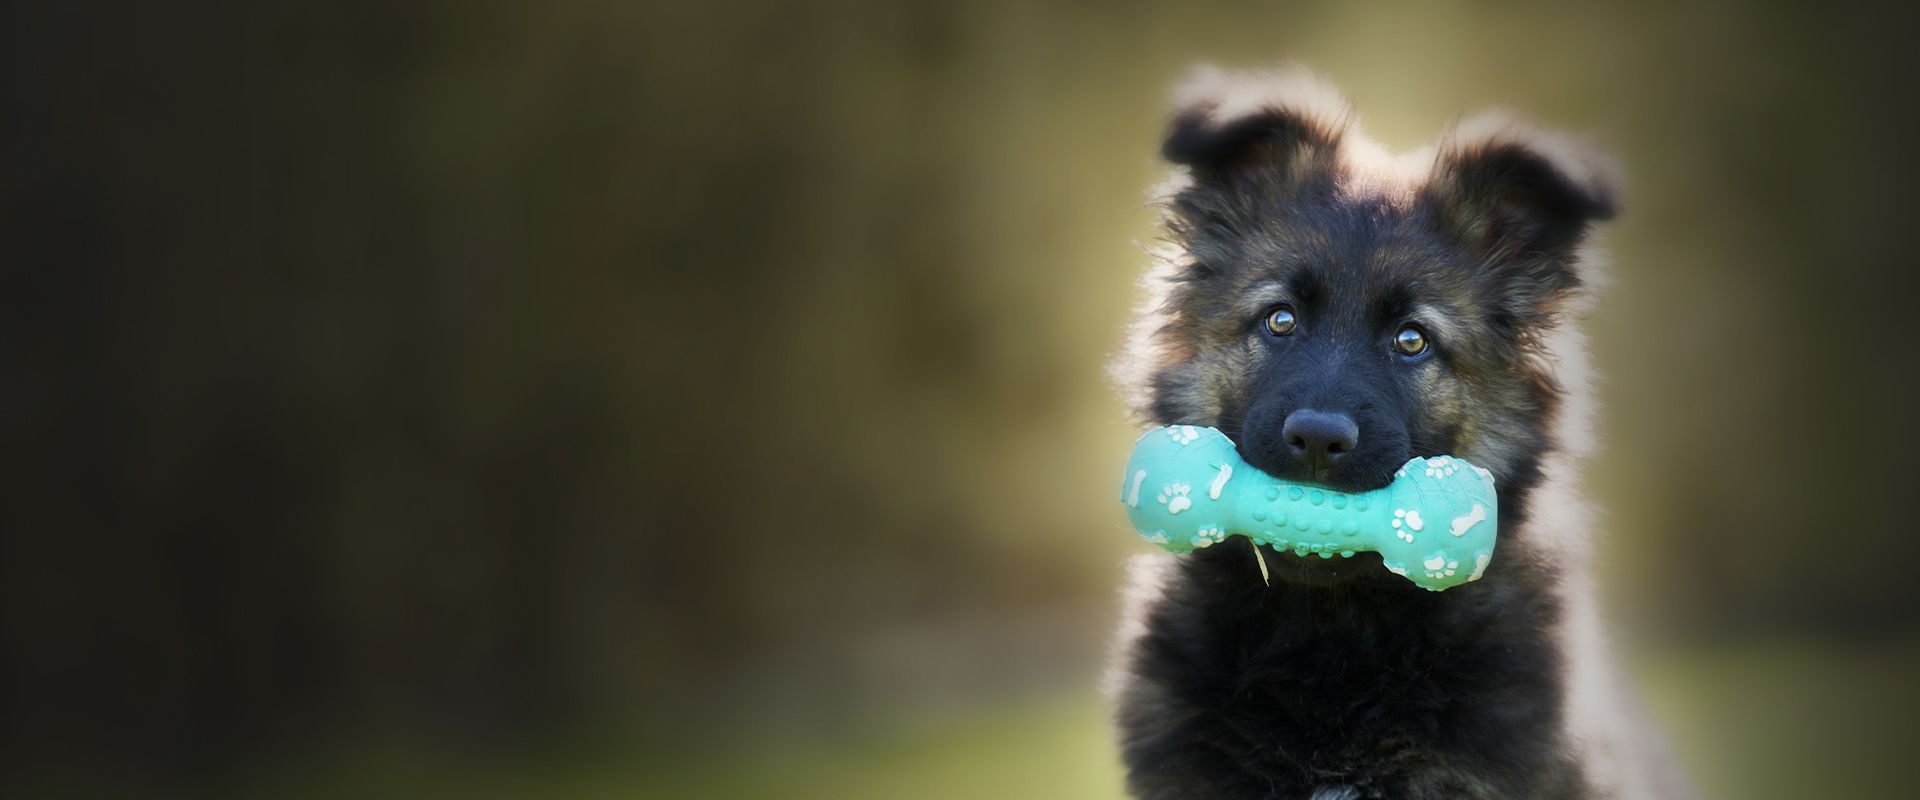 dog chewing a toy